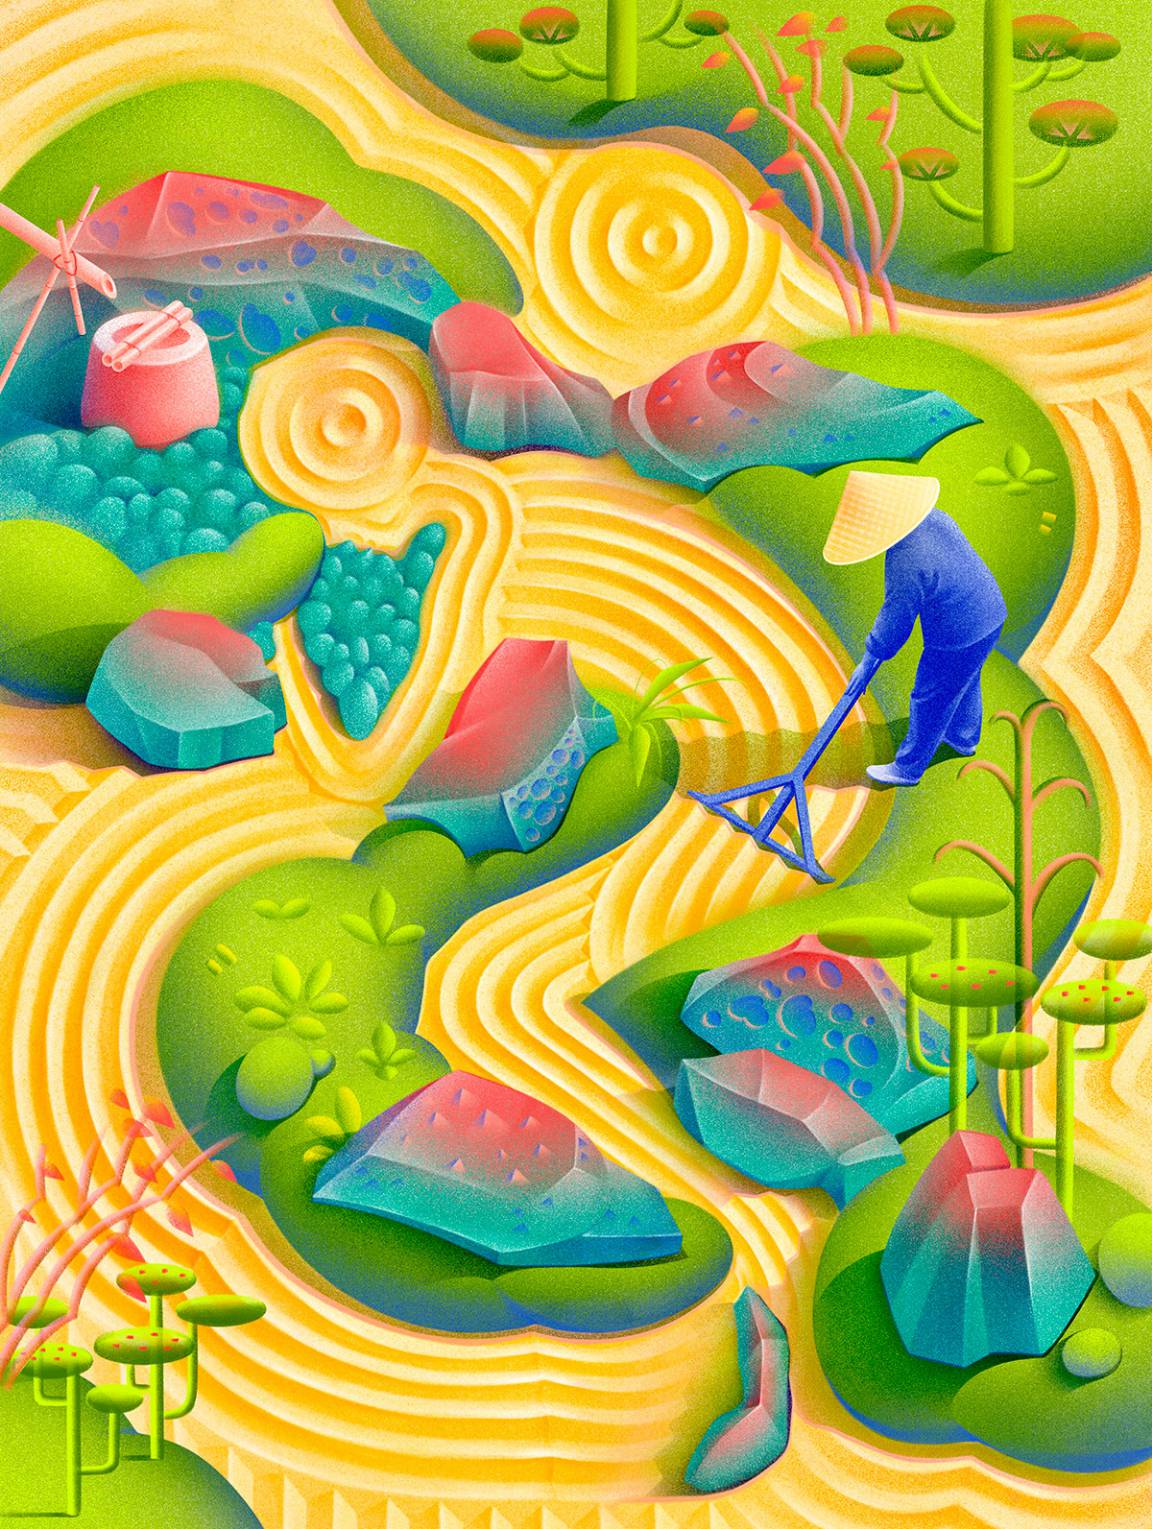 Intricate And Vibrant Surreal Illustrations By Wenjing Yang (1)